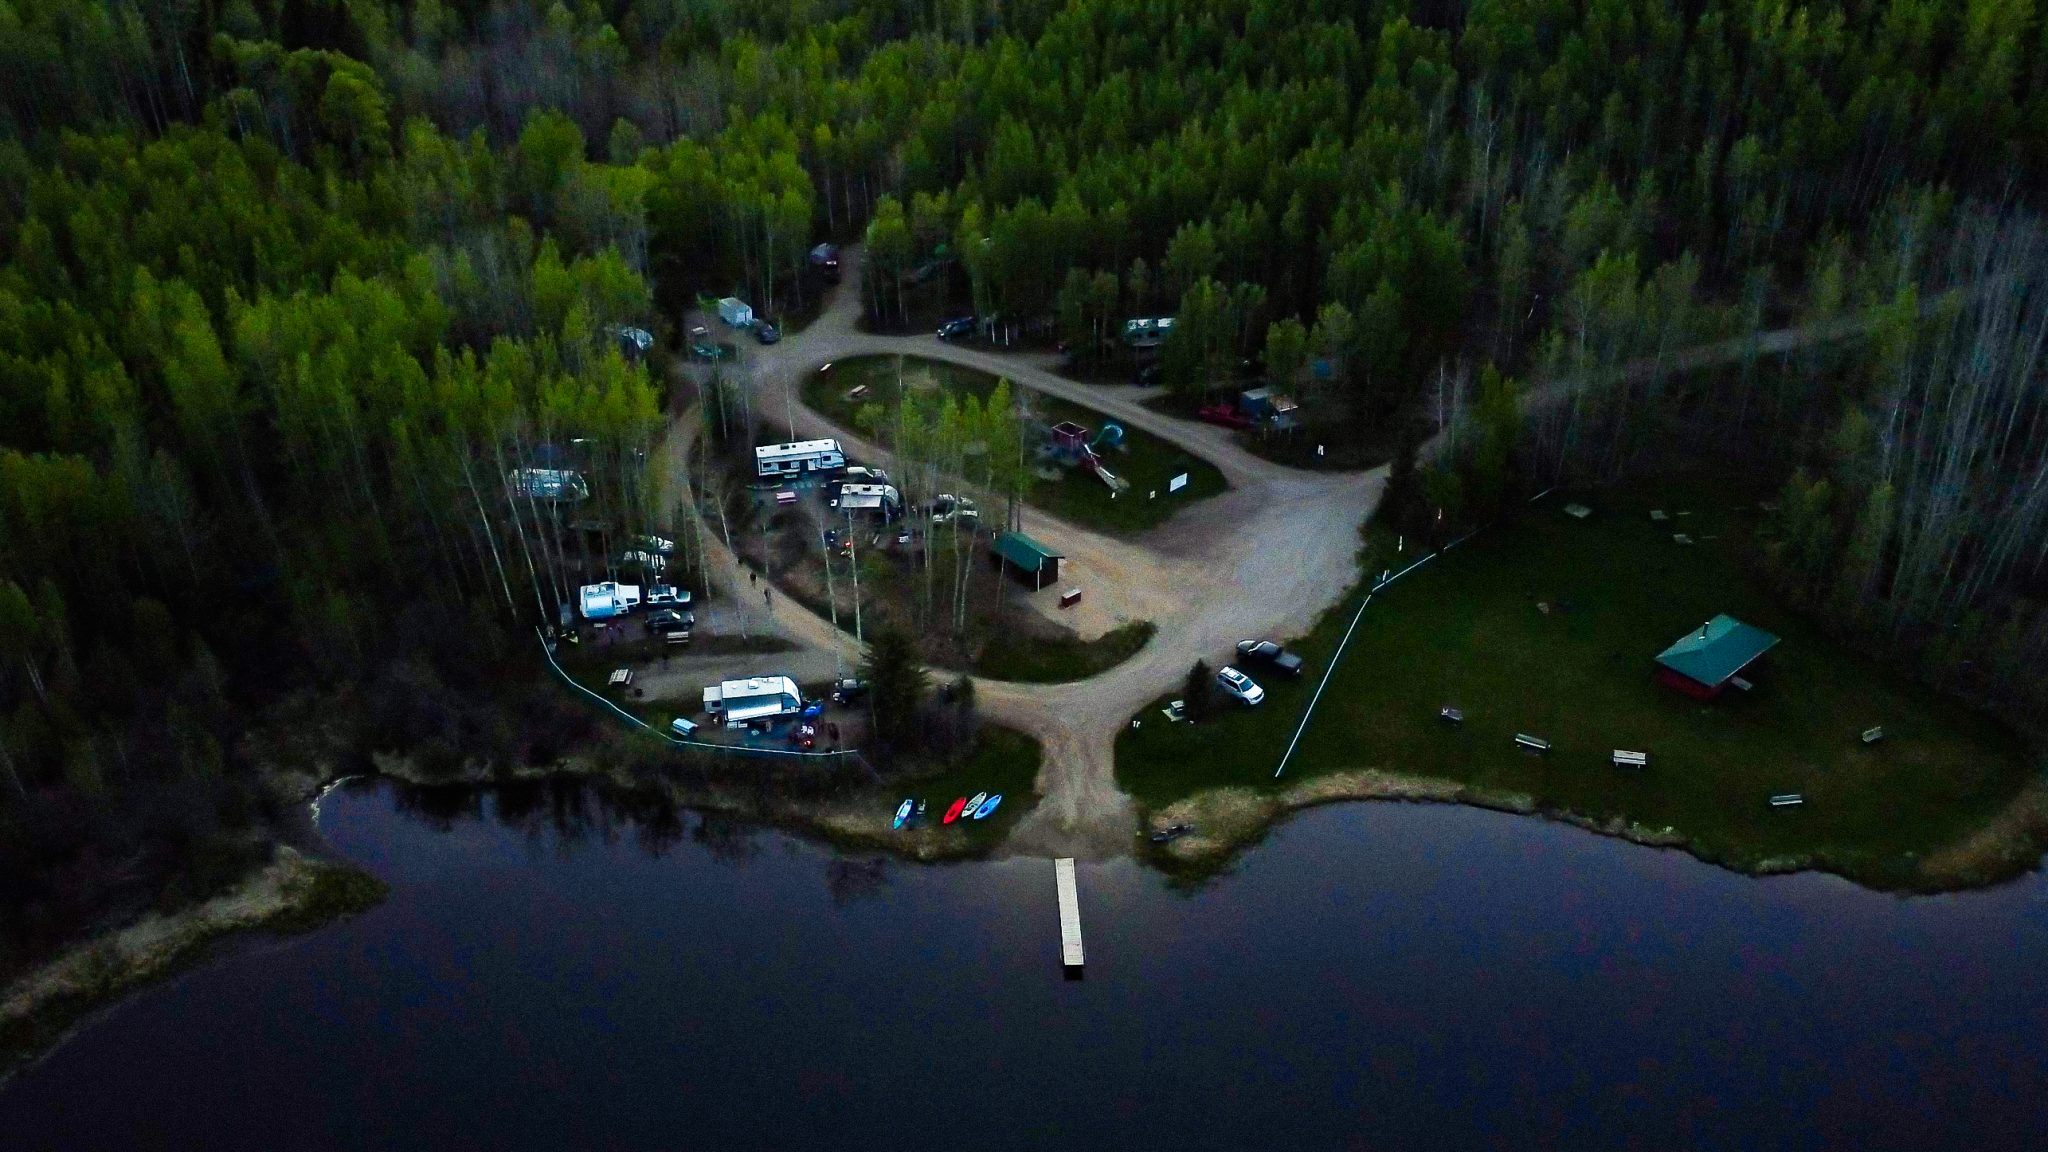 Overhead view of campground